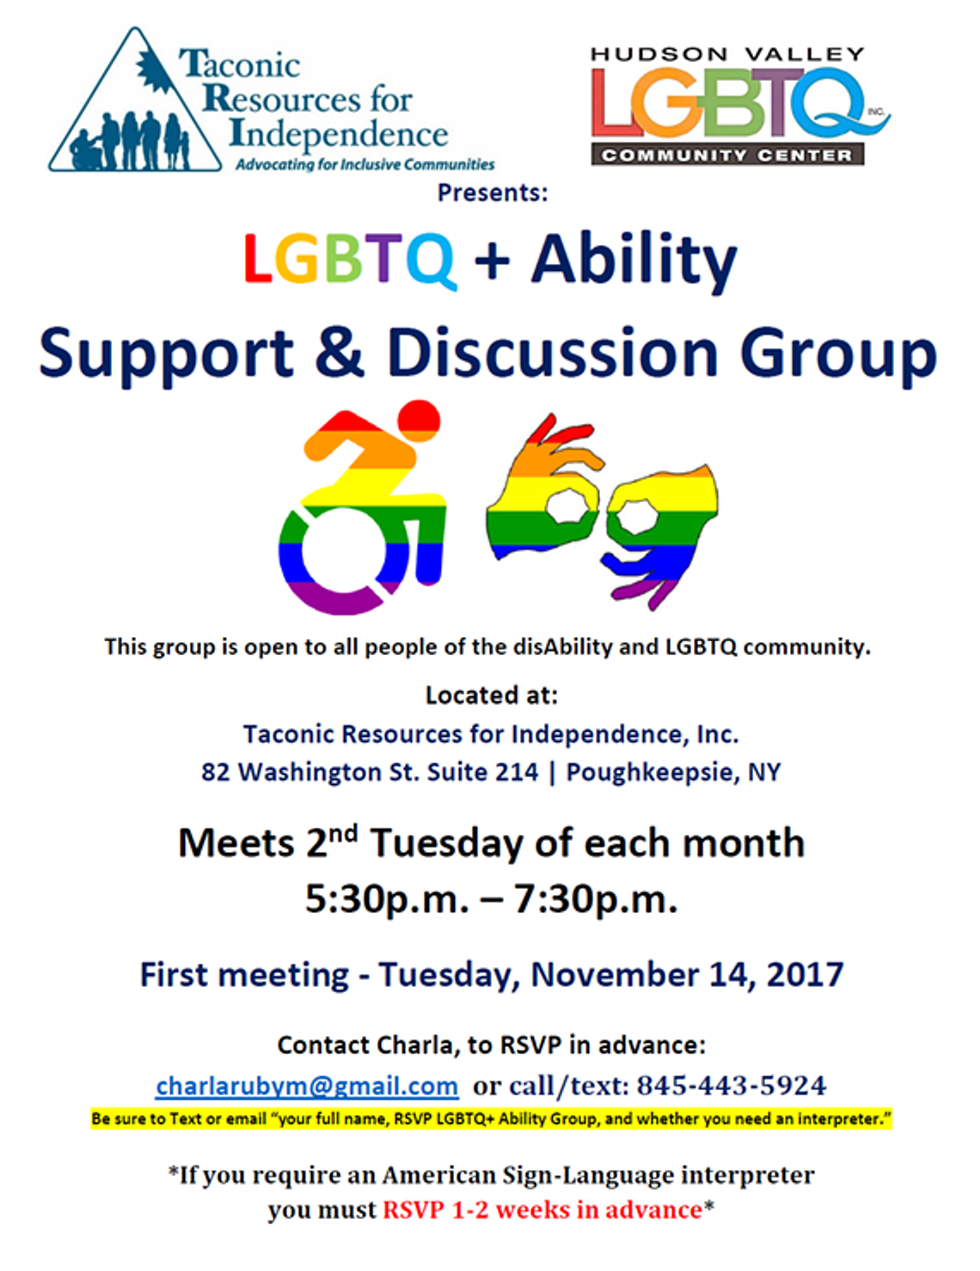 bdec27fe_lgbtq_ability_support_discussion_group_flyer_pic.png